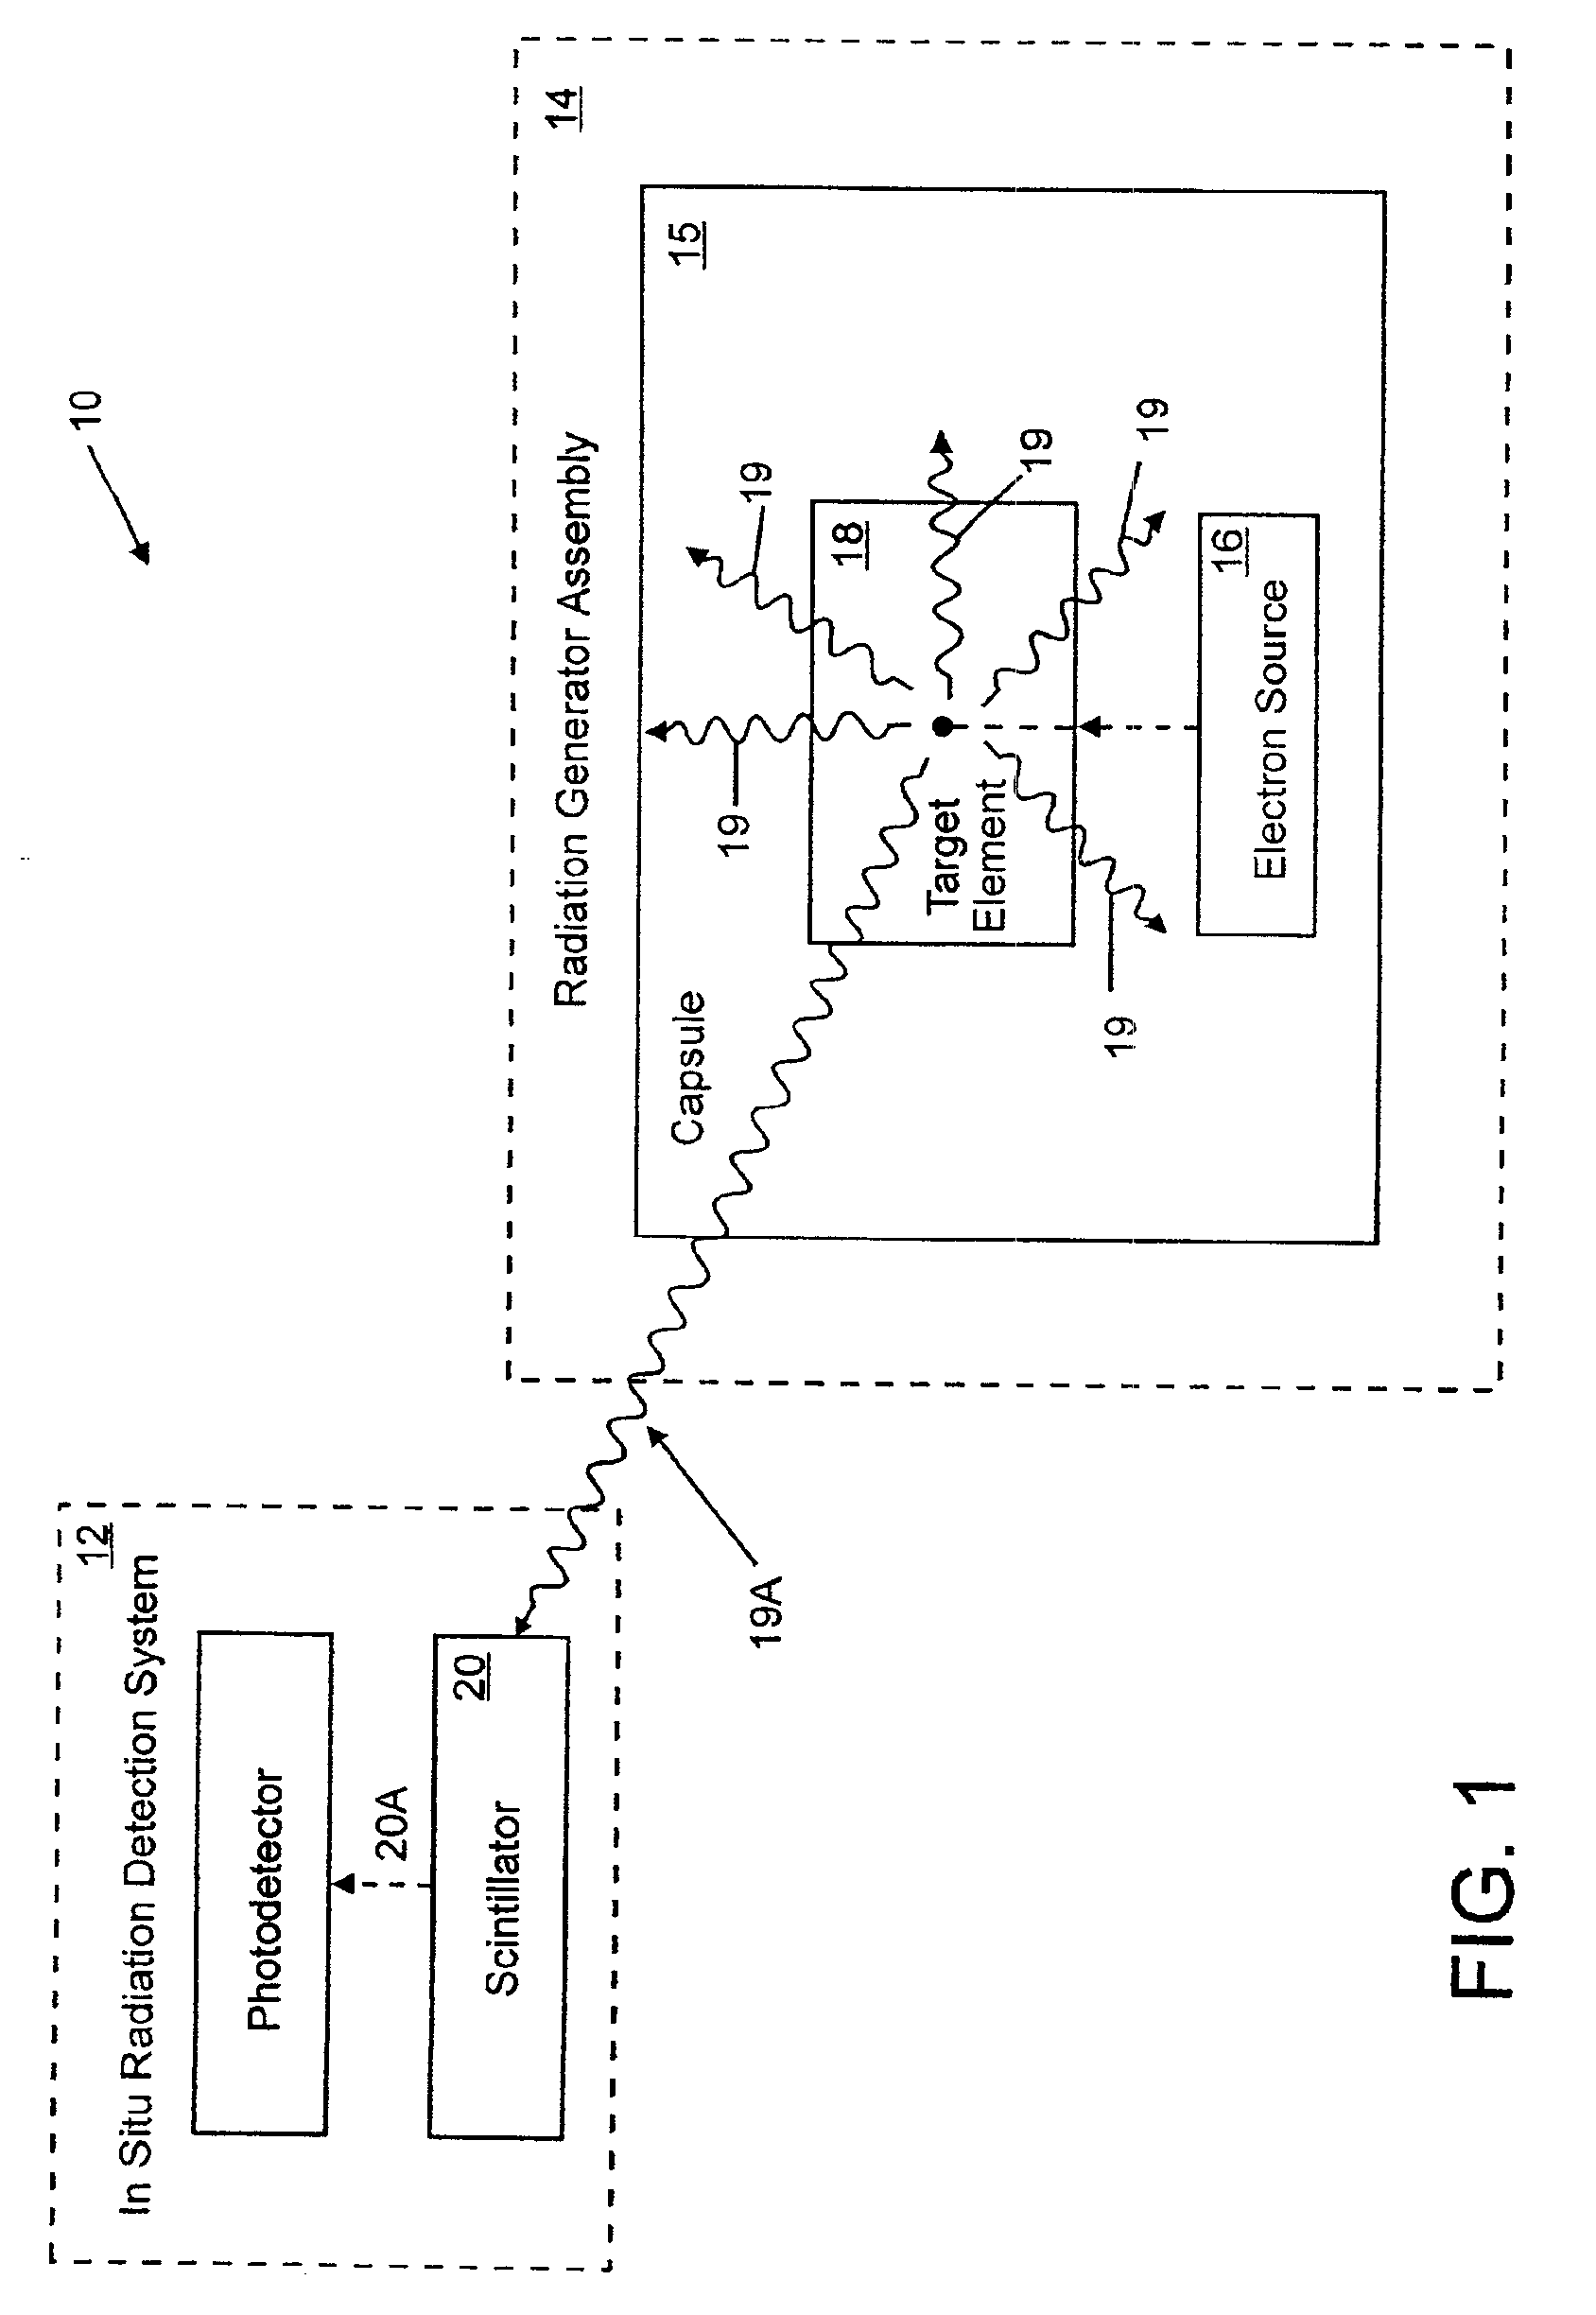 Therapeutic radiation source with in situ radiation detecting system